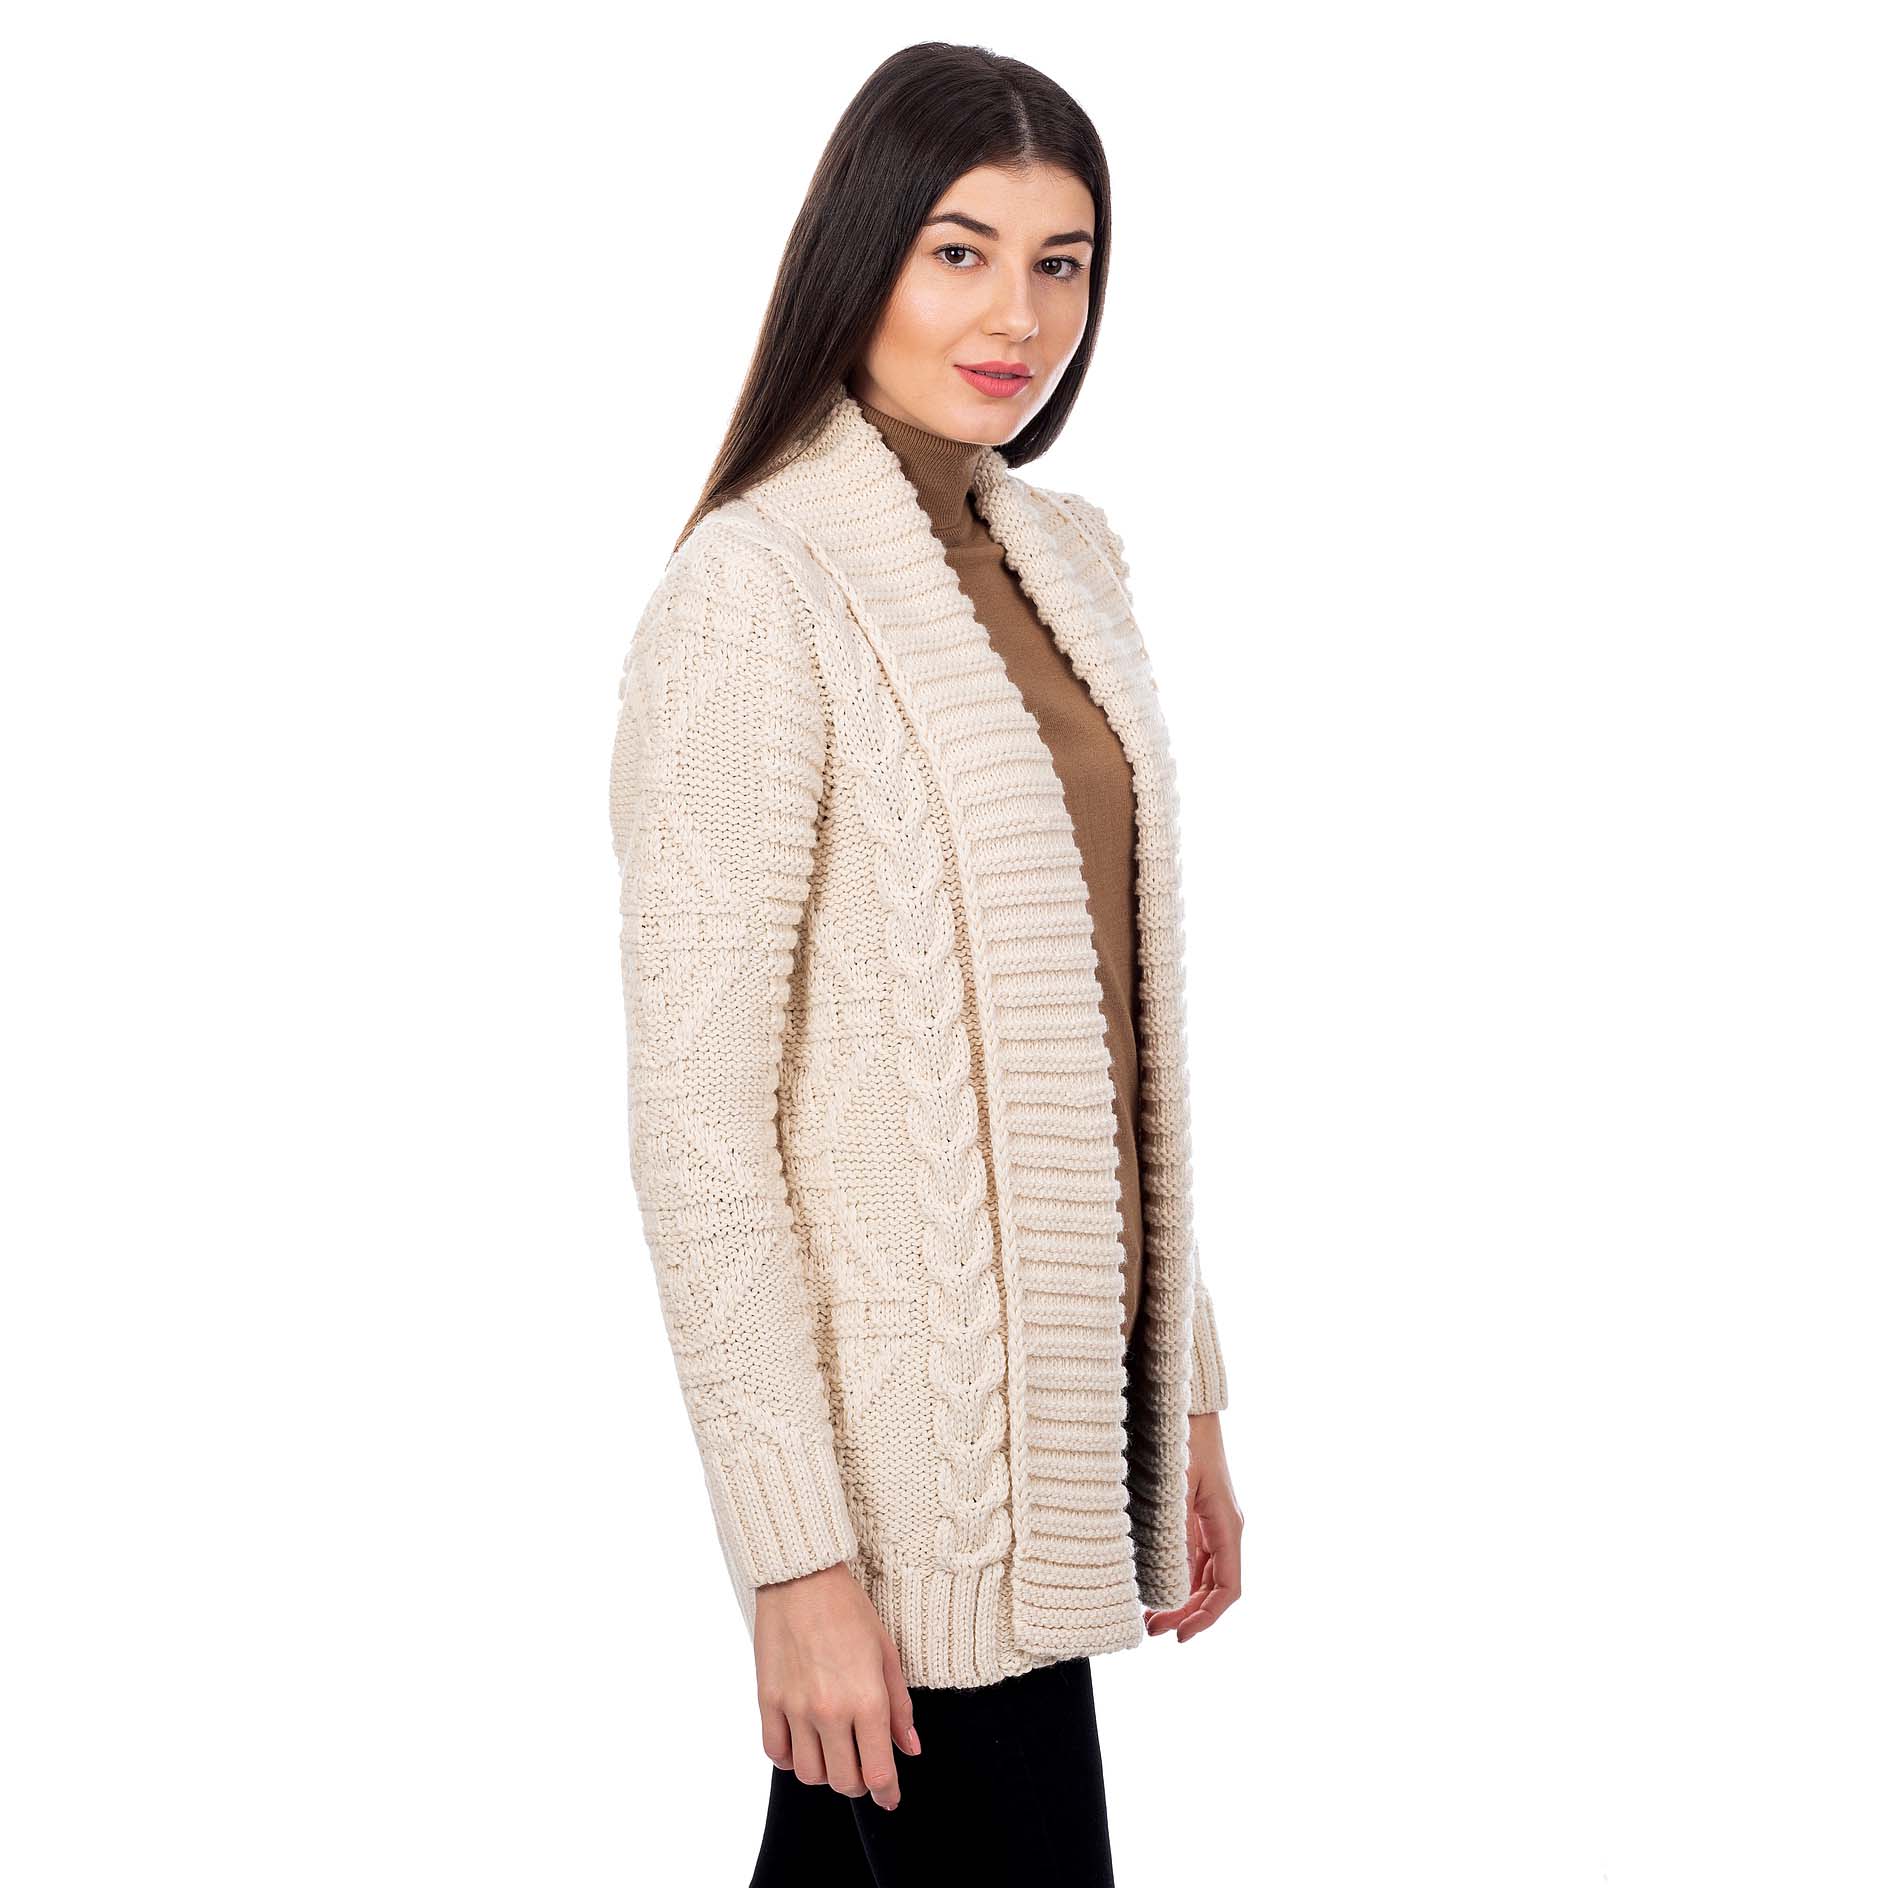 Product image for Irish Cardigan | Open Front Cable Knit Ladies Cardigan